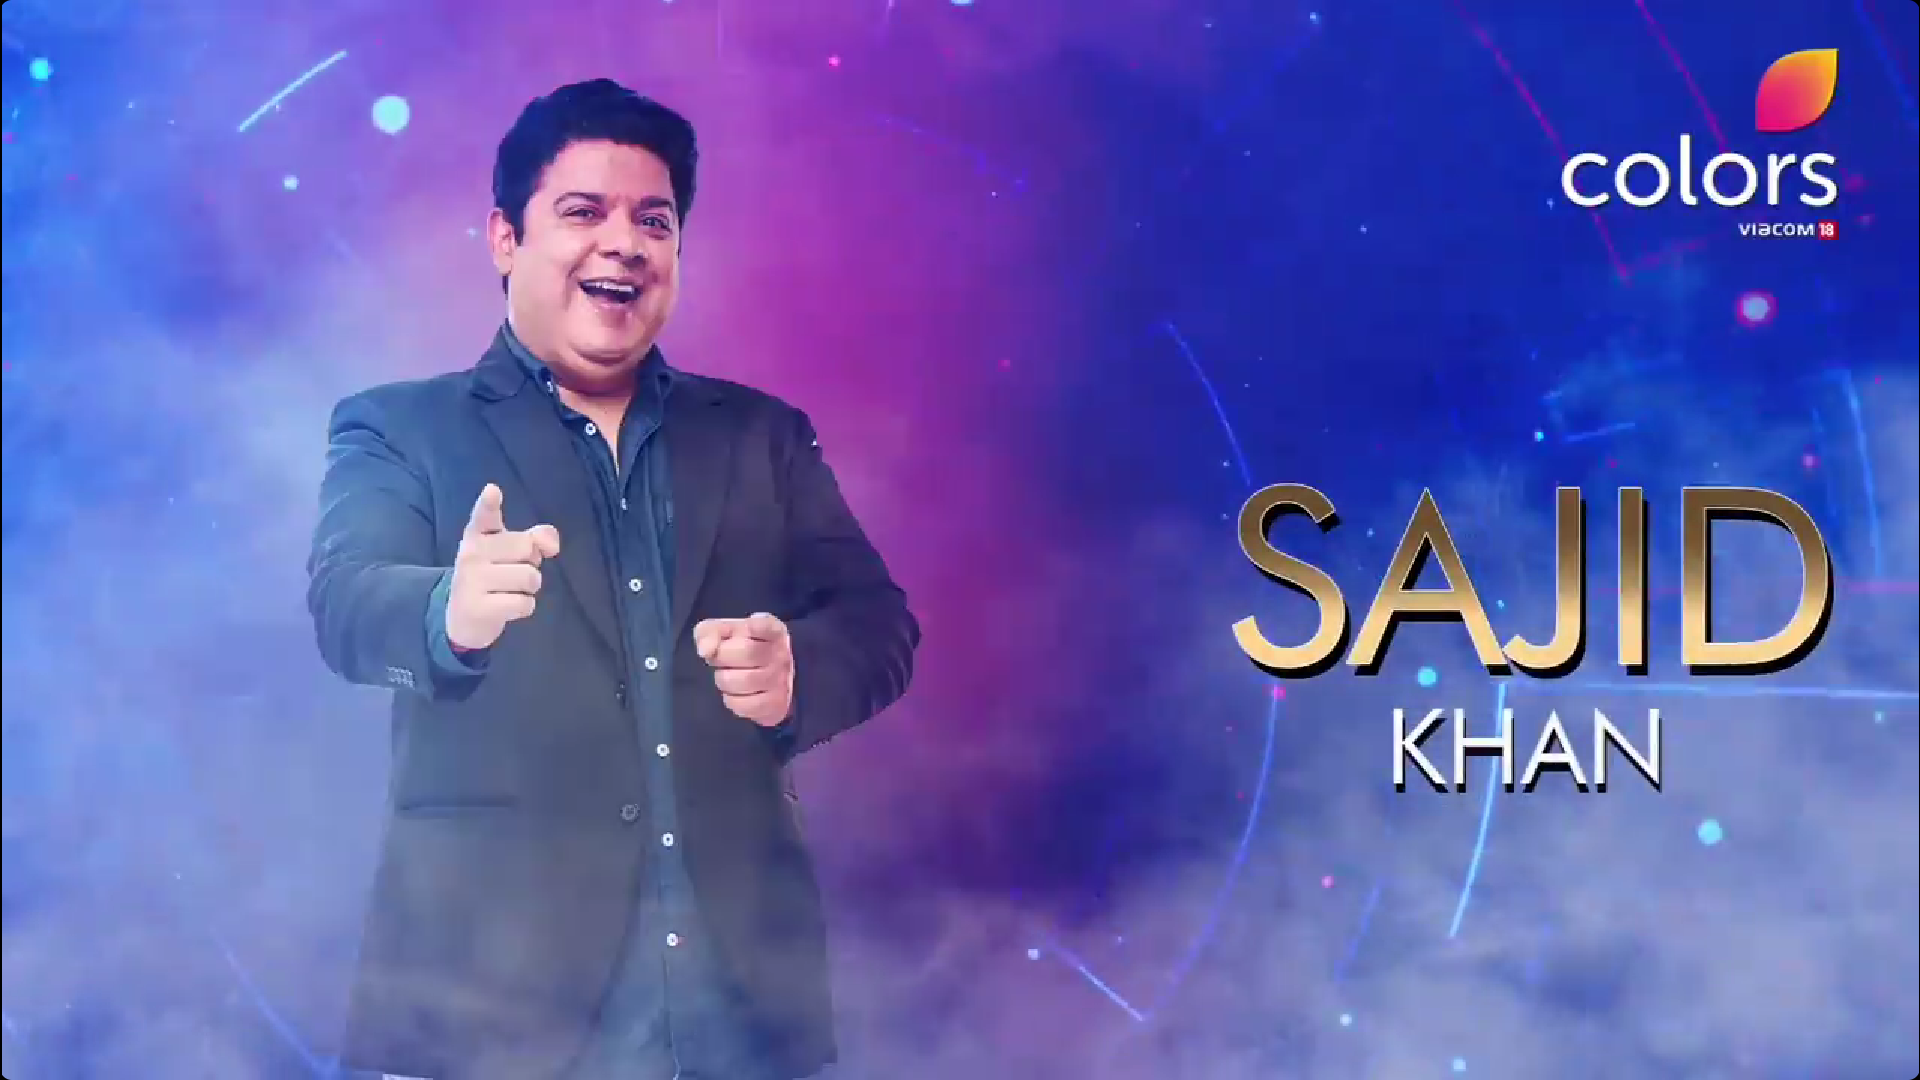 know about bigg boss contestant sajid khan 